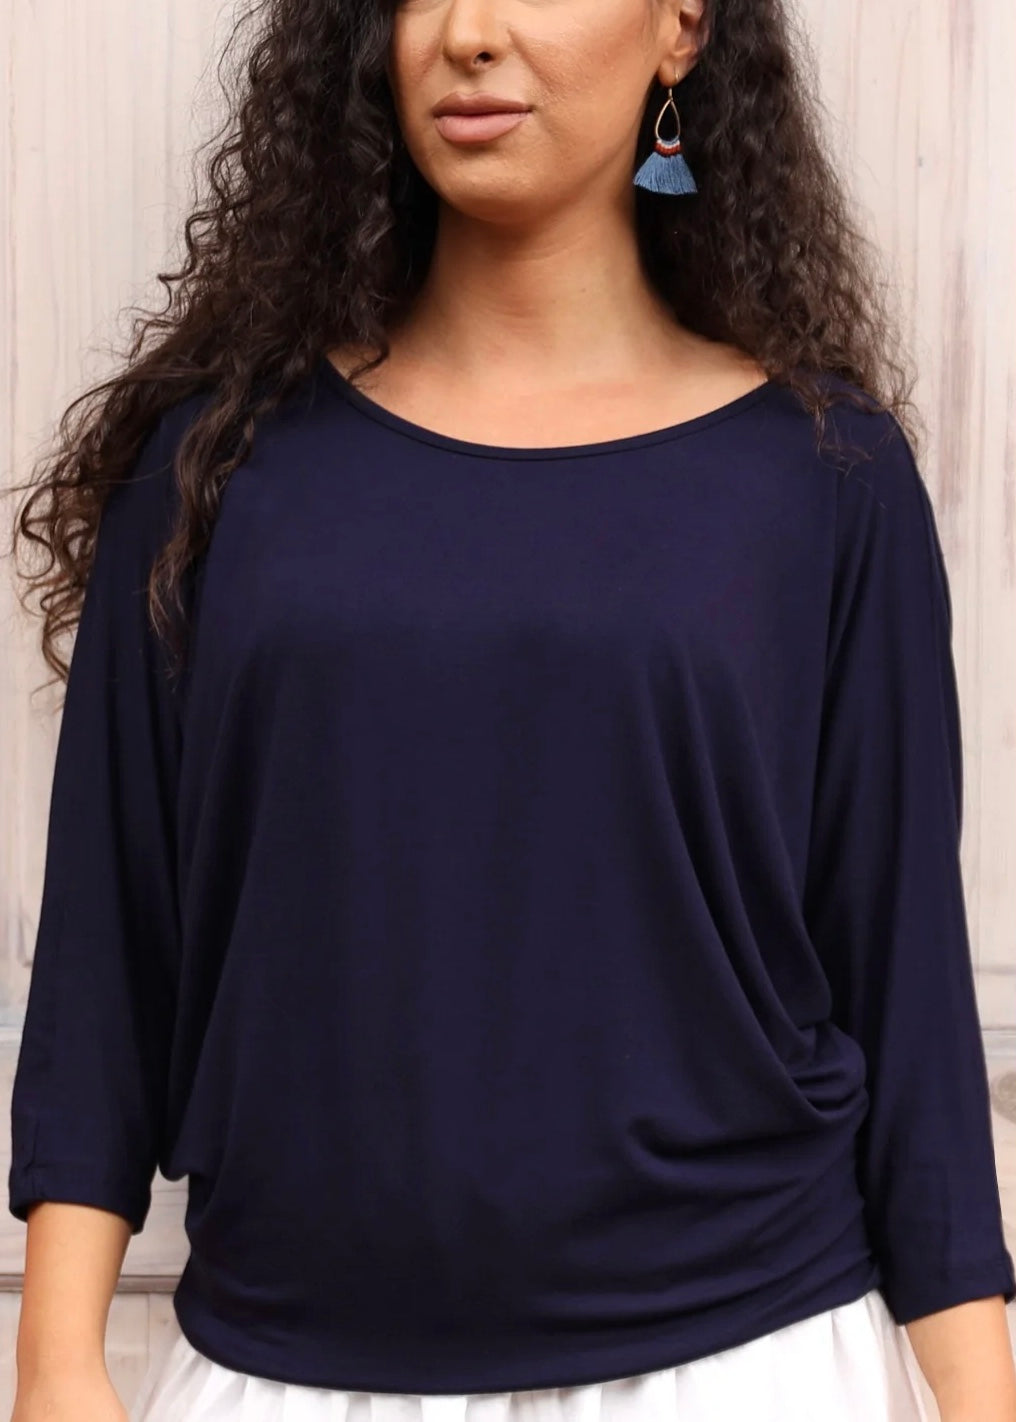 Batwing Top - Navy Blue